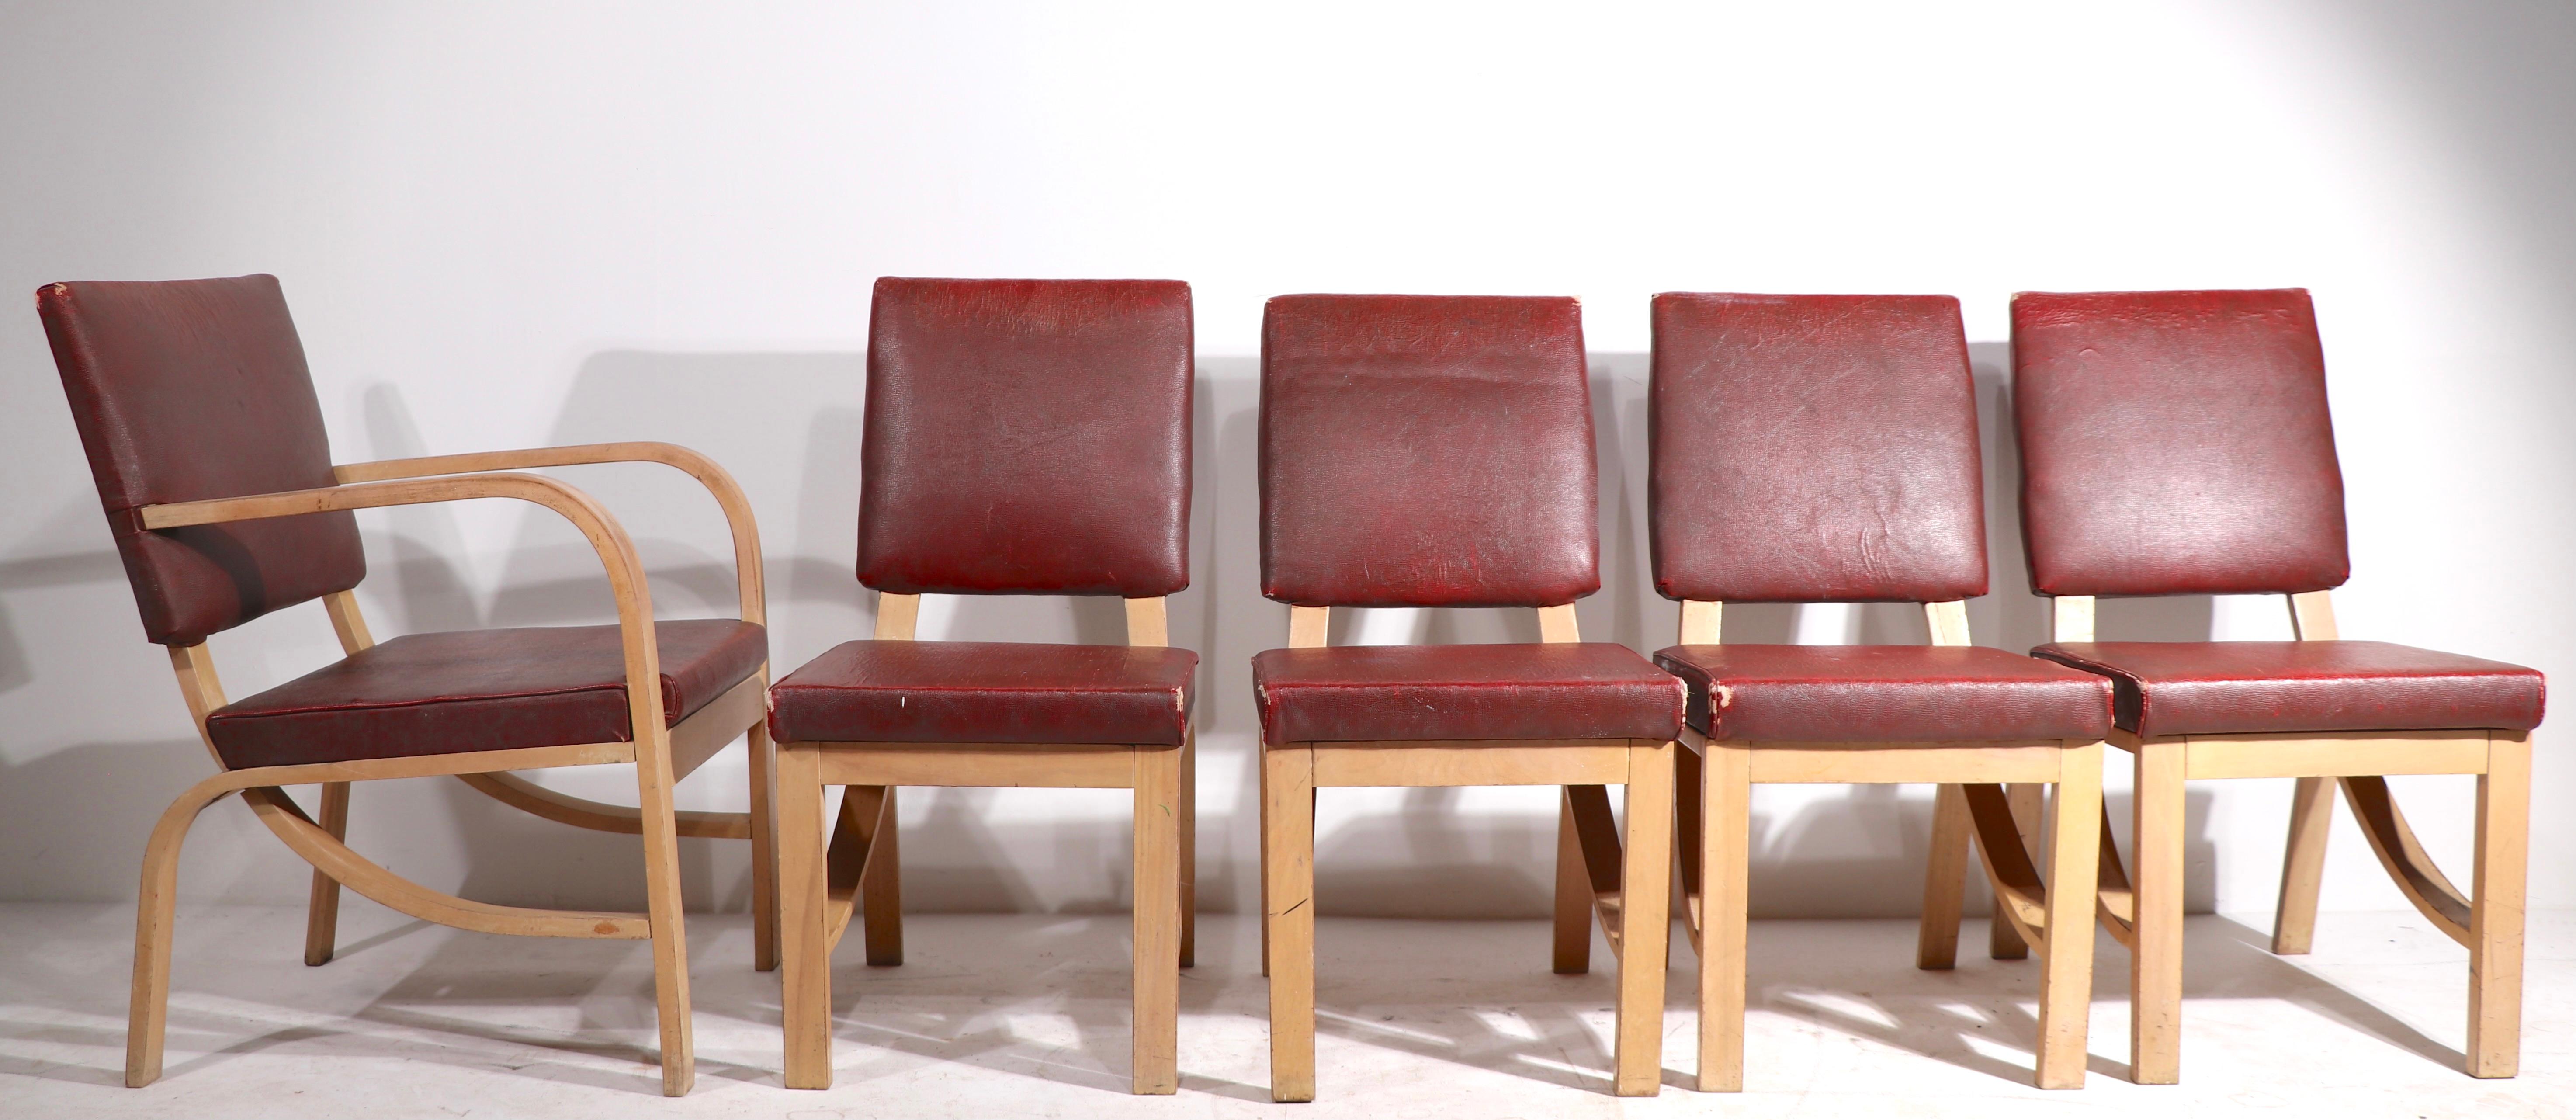 American Set of 5 Rohde for Heywood Wakefield Dining Chairs